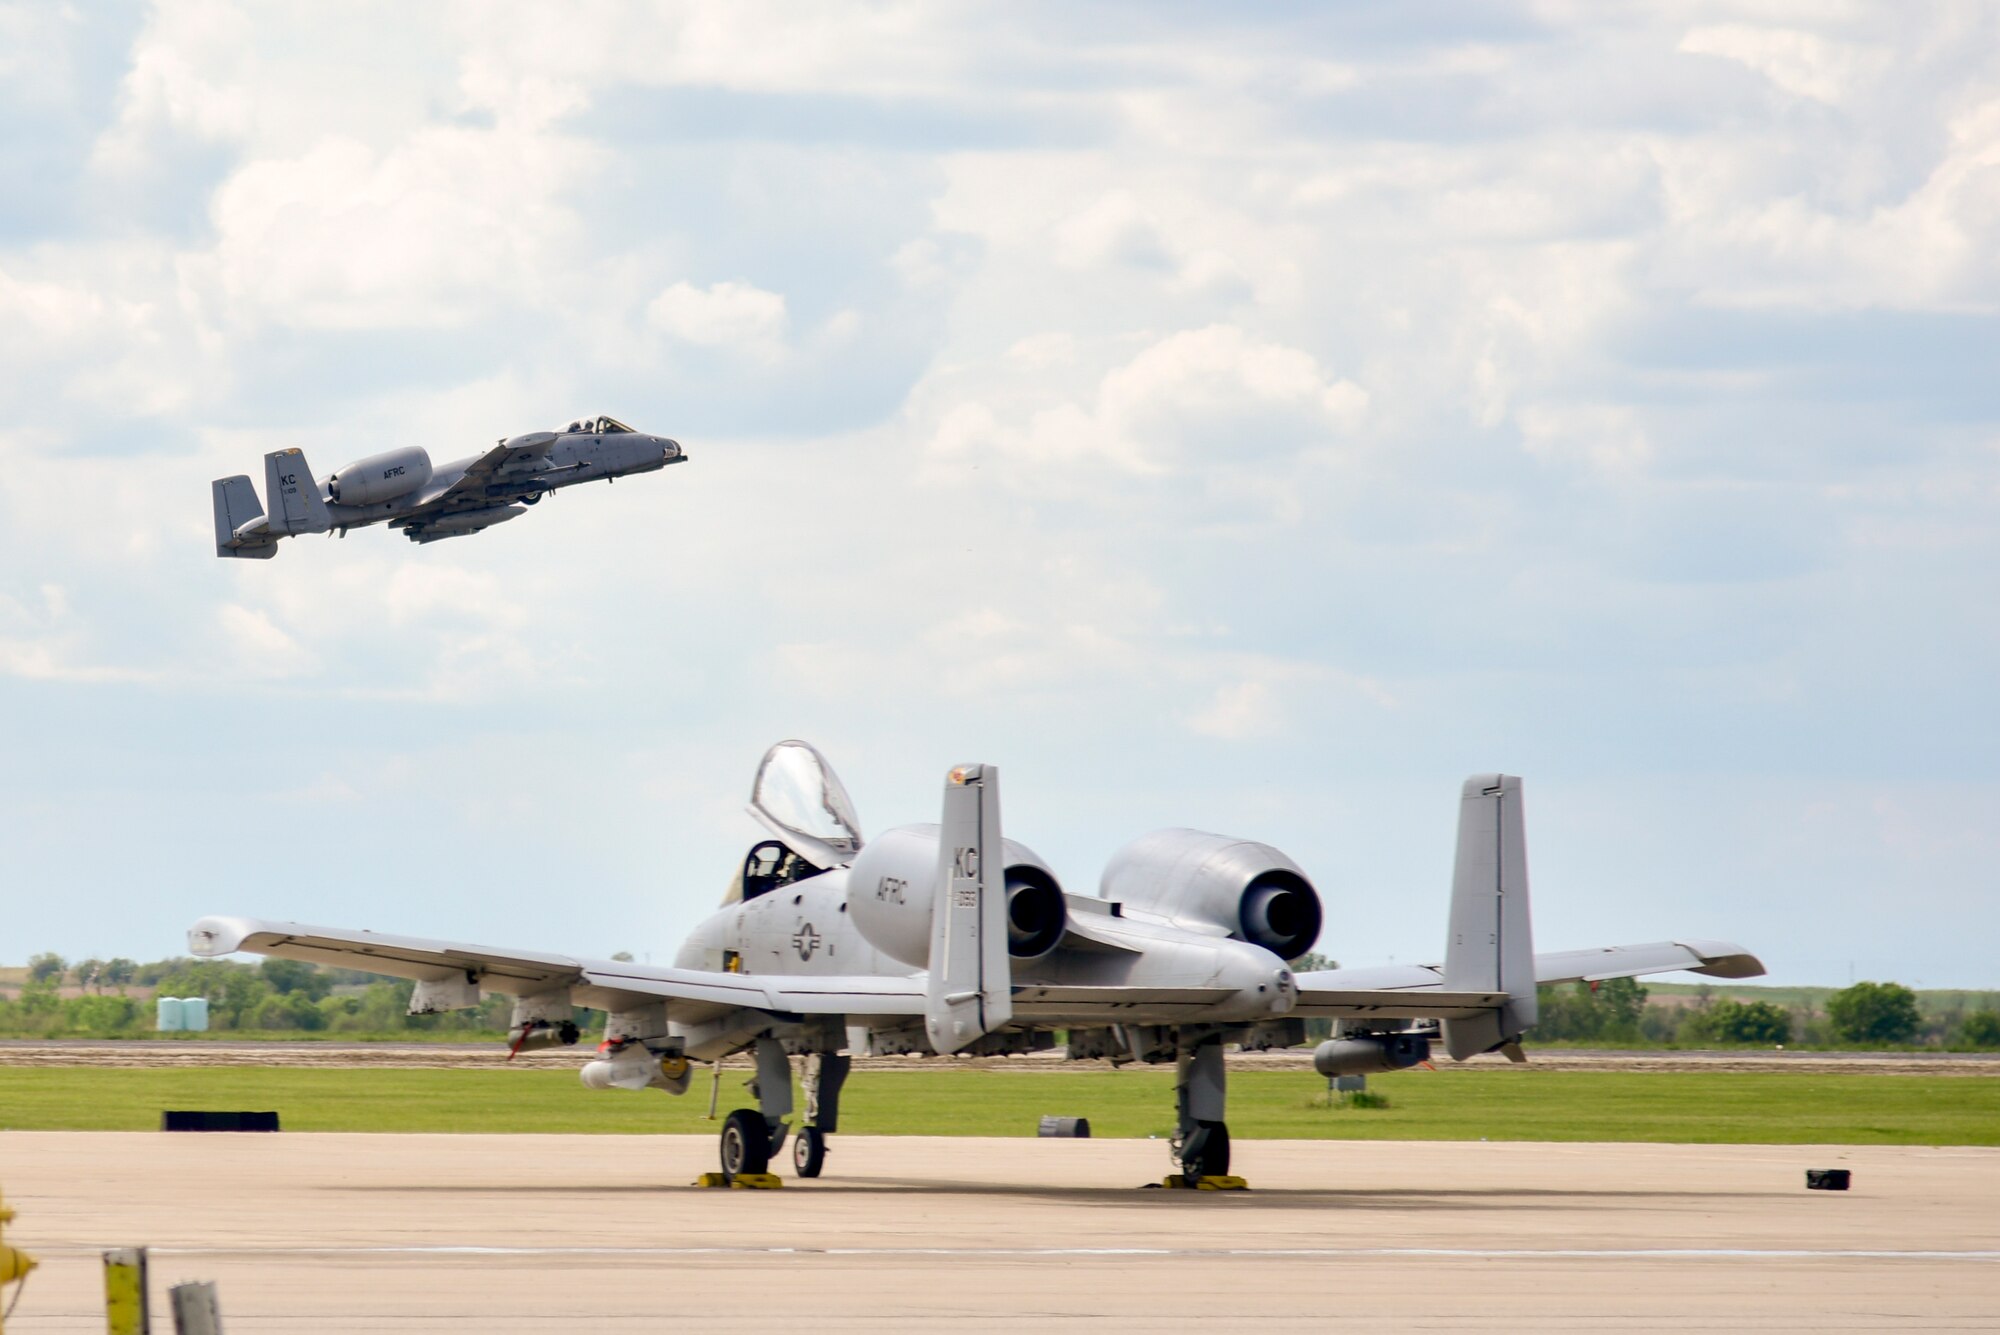 U.S. Air Force Reserve A-10 Thunderbolt II, 442d Fighter Wing, takes off at an airport near Salina, Kansas, May 12, 2021. The A-10s provided fighter escort to the Air Force Reserve 327th Airlift Squadron as the C-130J Super Hercules provided agile combat support to the training scenario. (U.S. Air Force photo by Senior Airman Kalee Sexton)